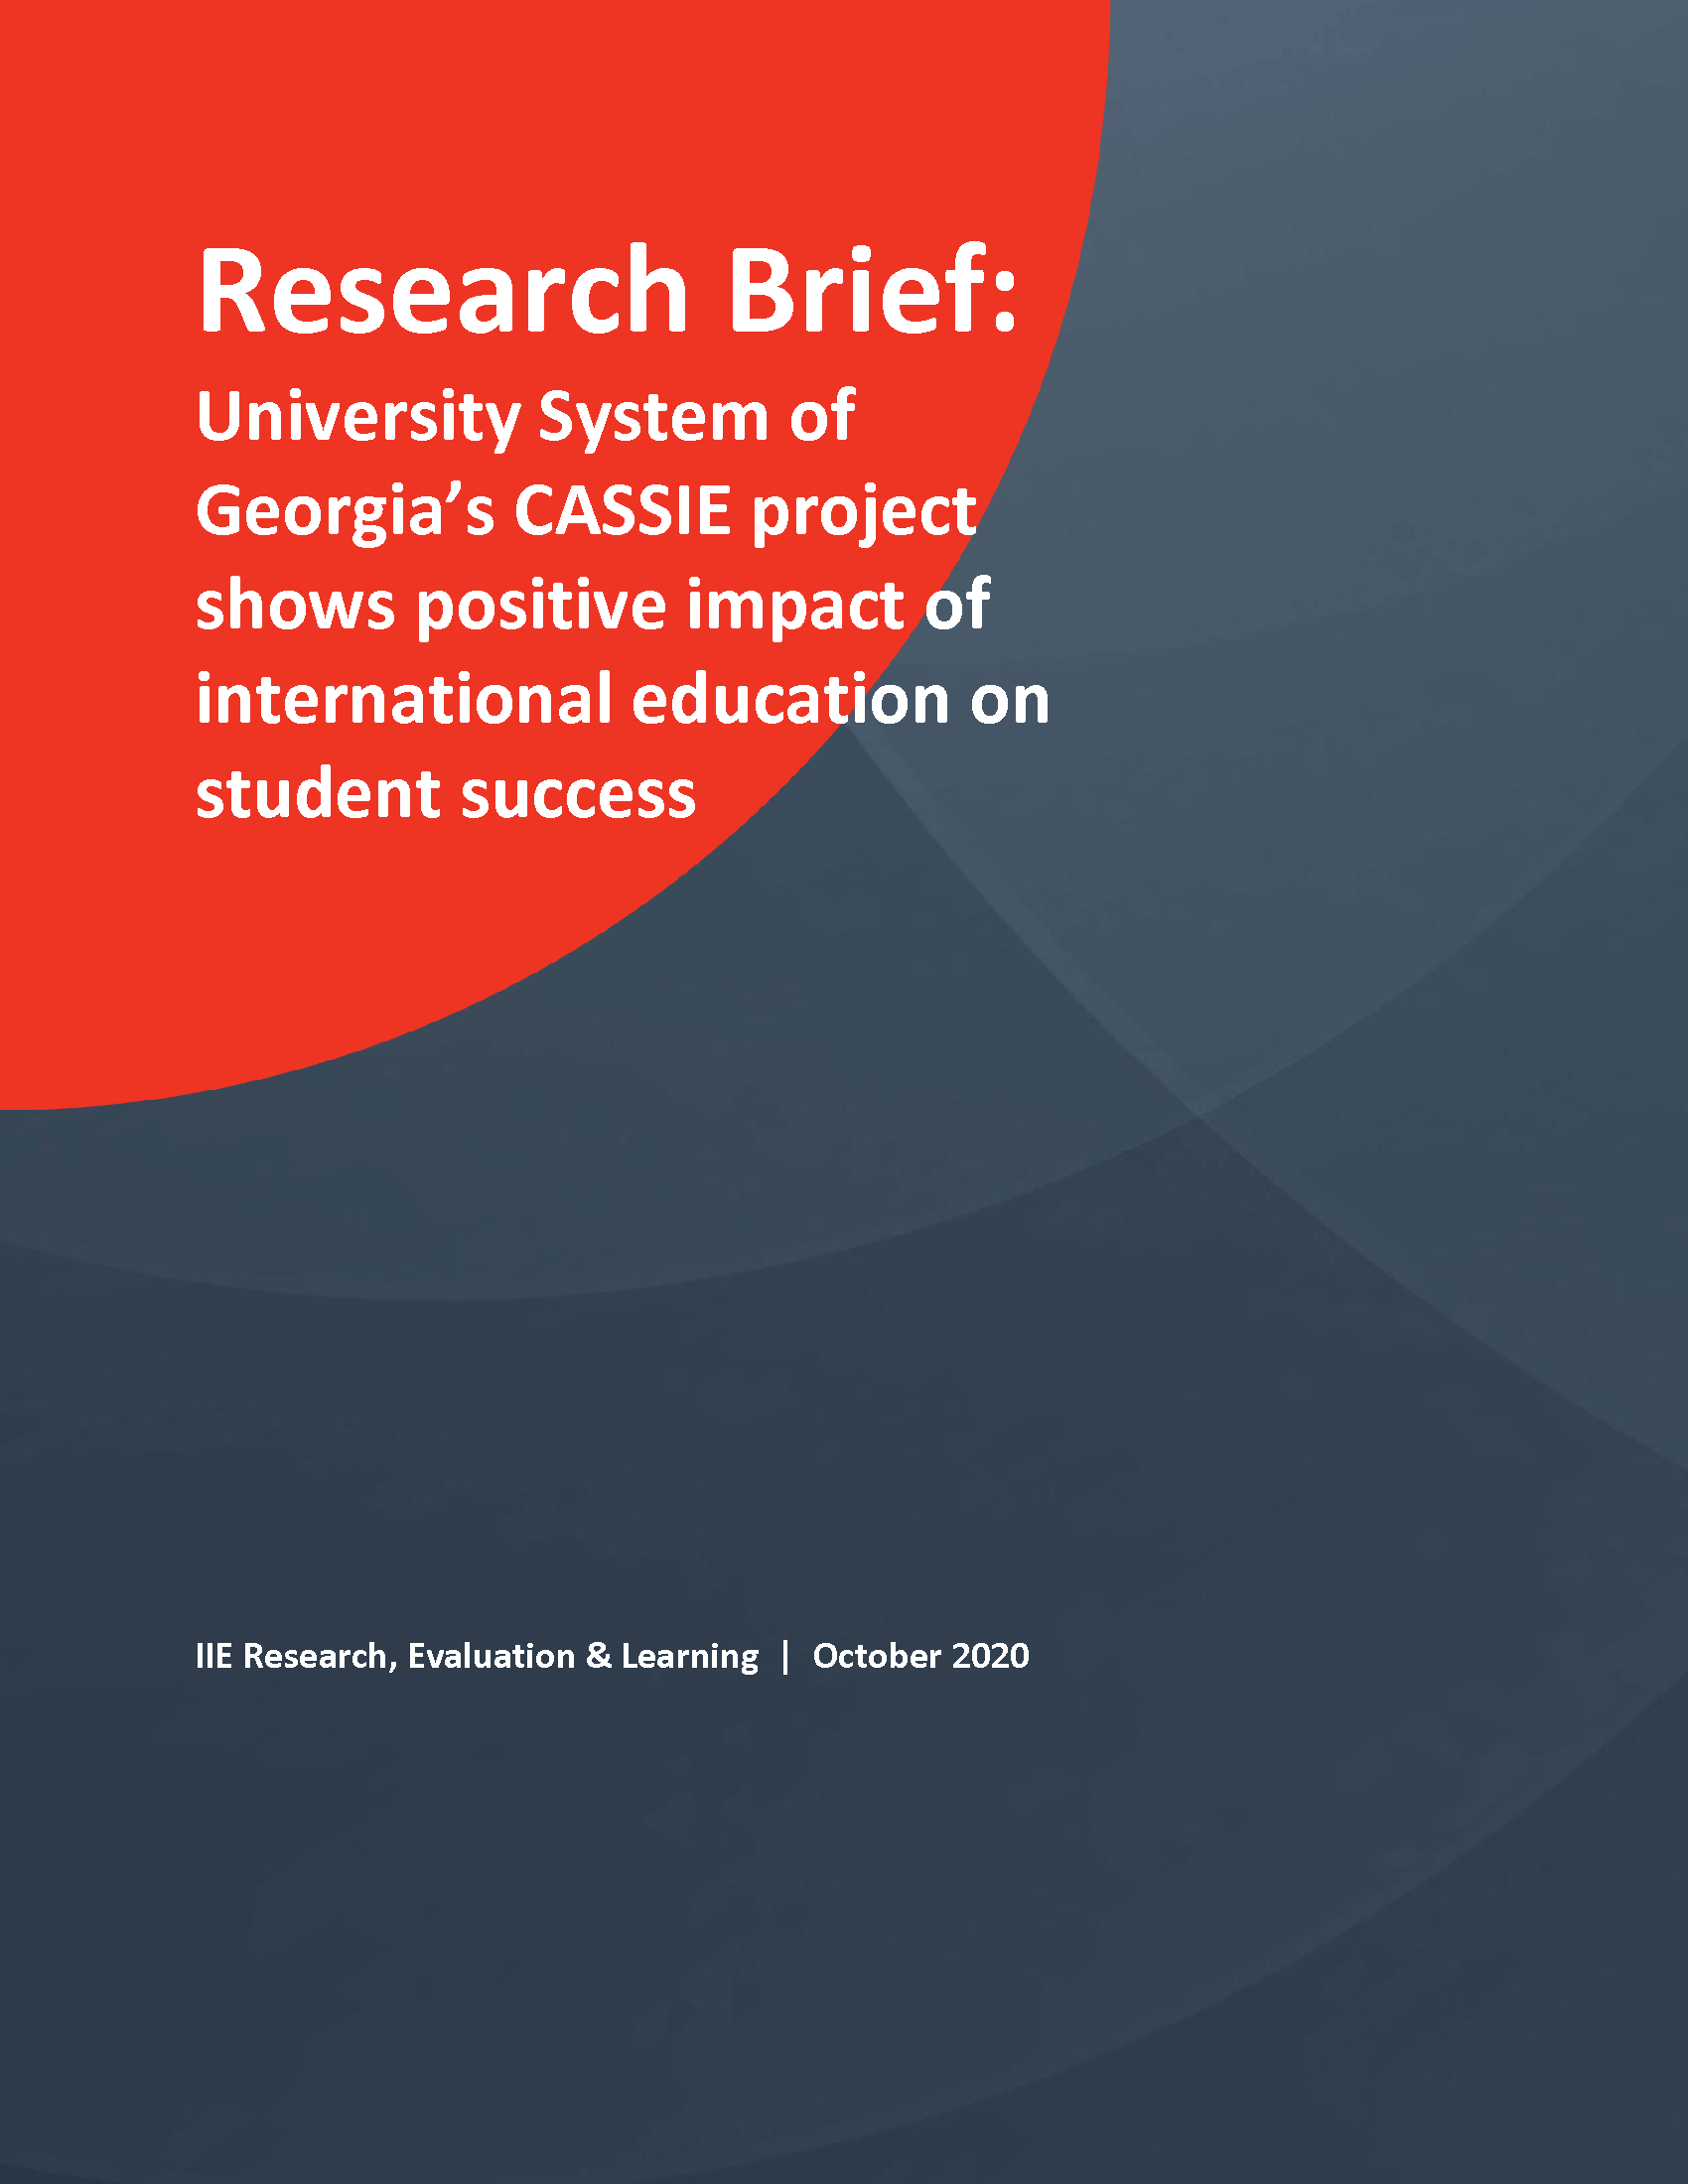 CASSIE Research Brief - cover page